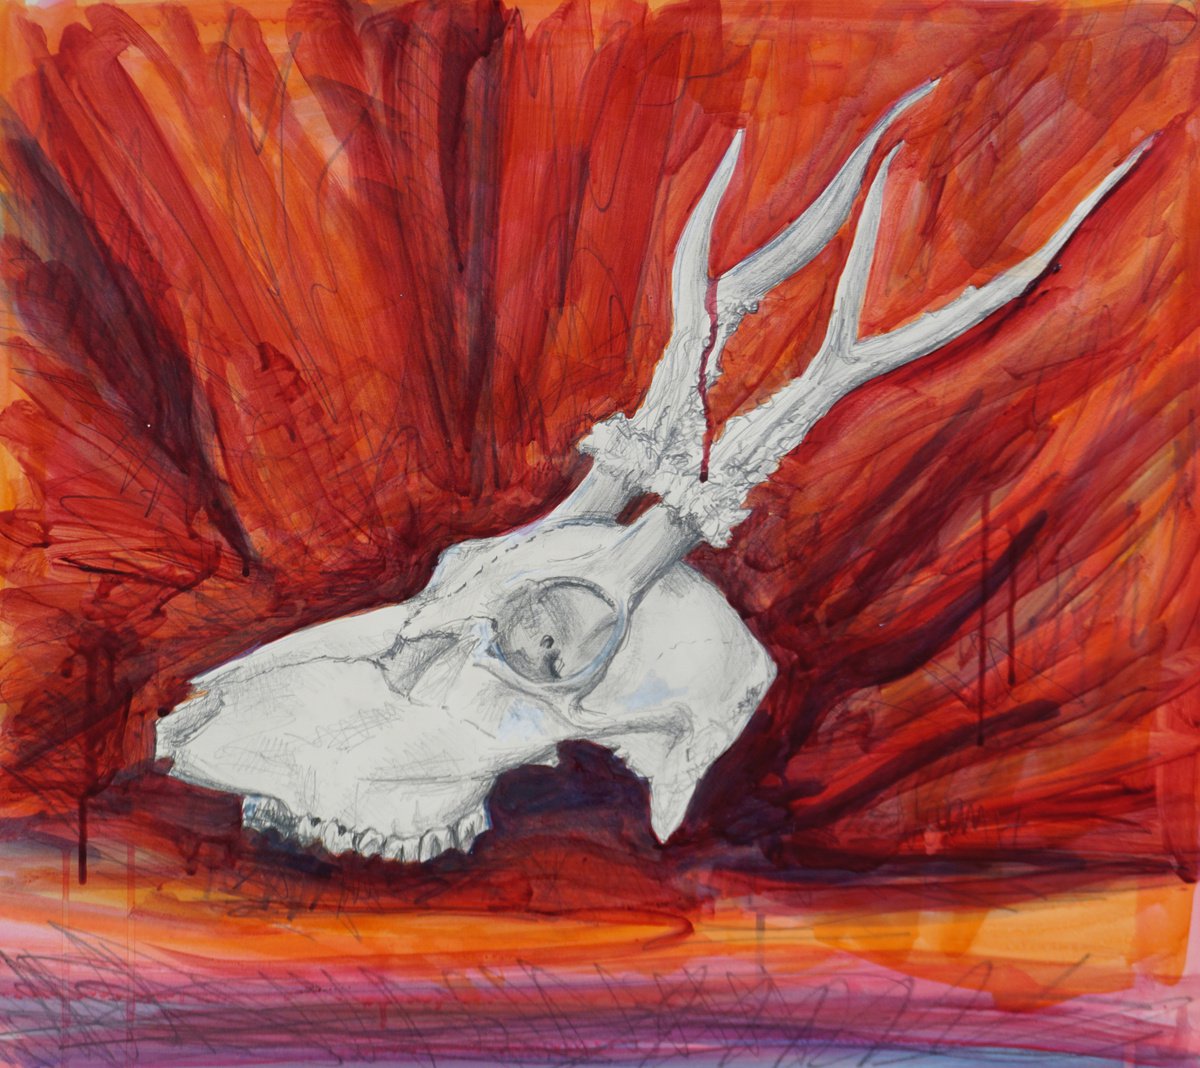 Skull against red by Megan Cheetham